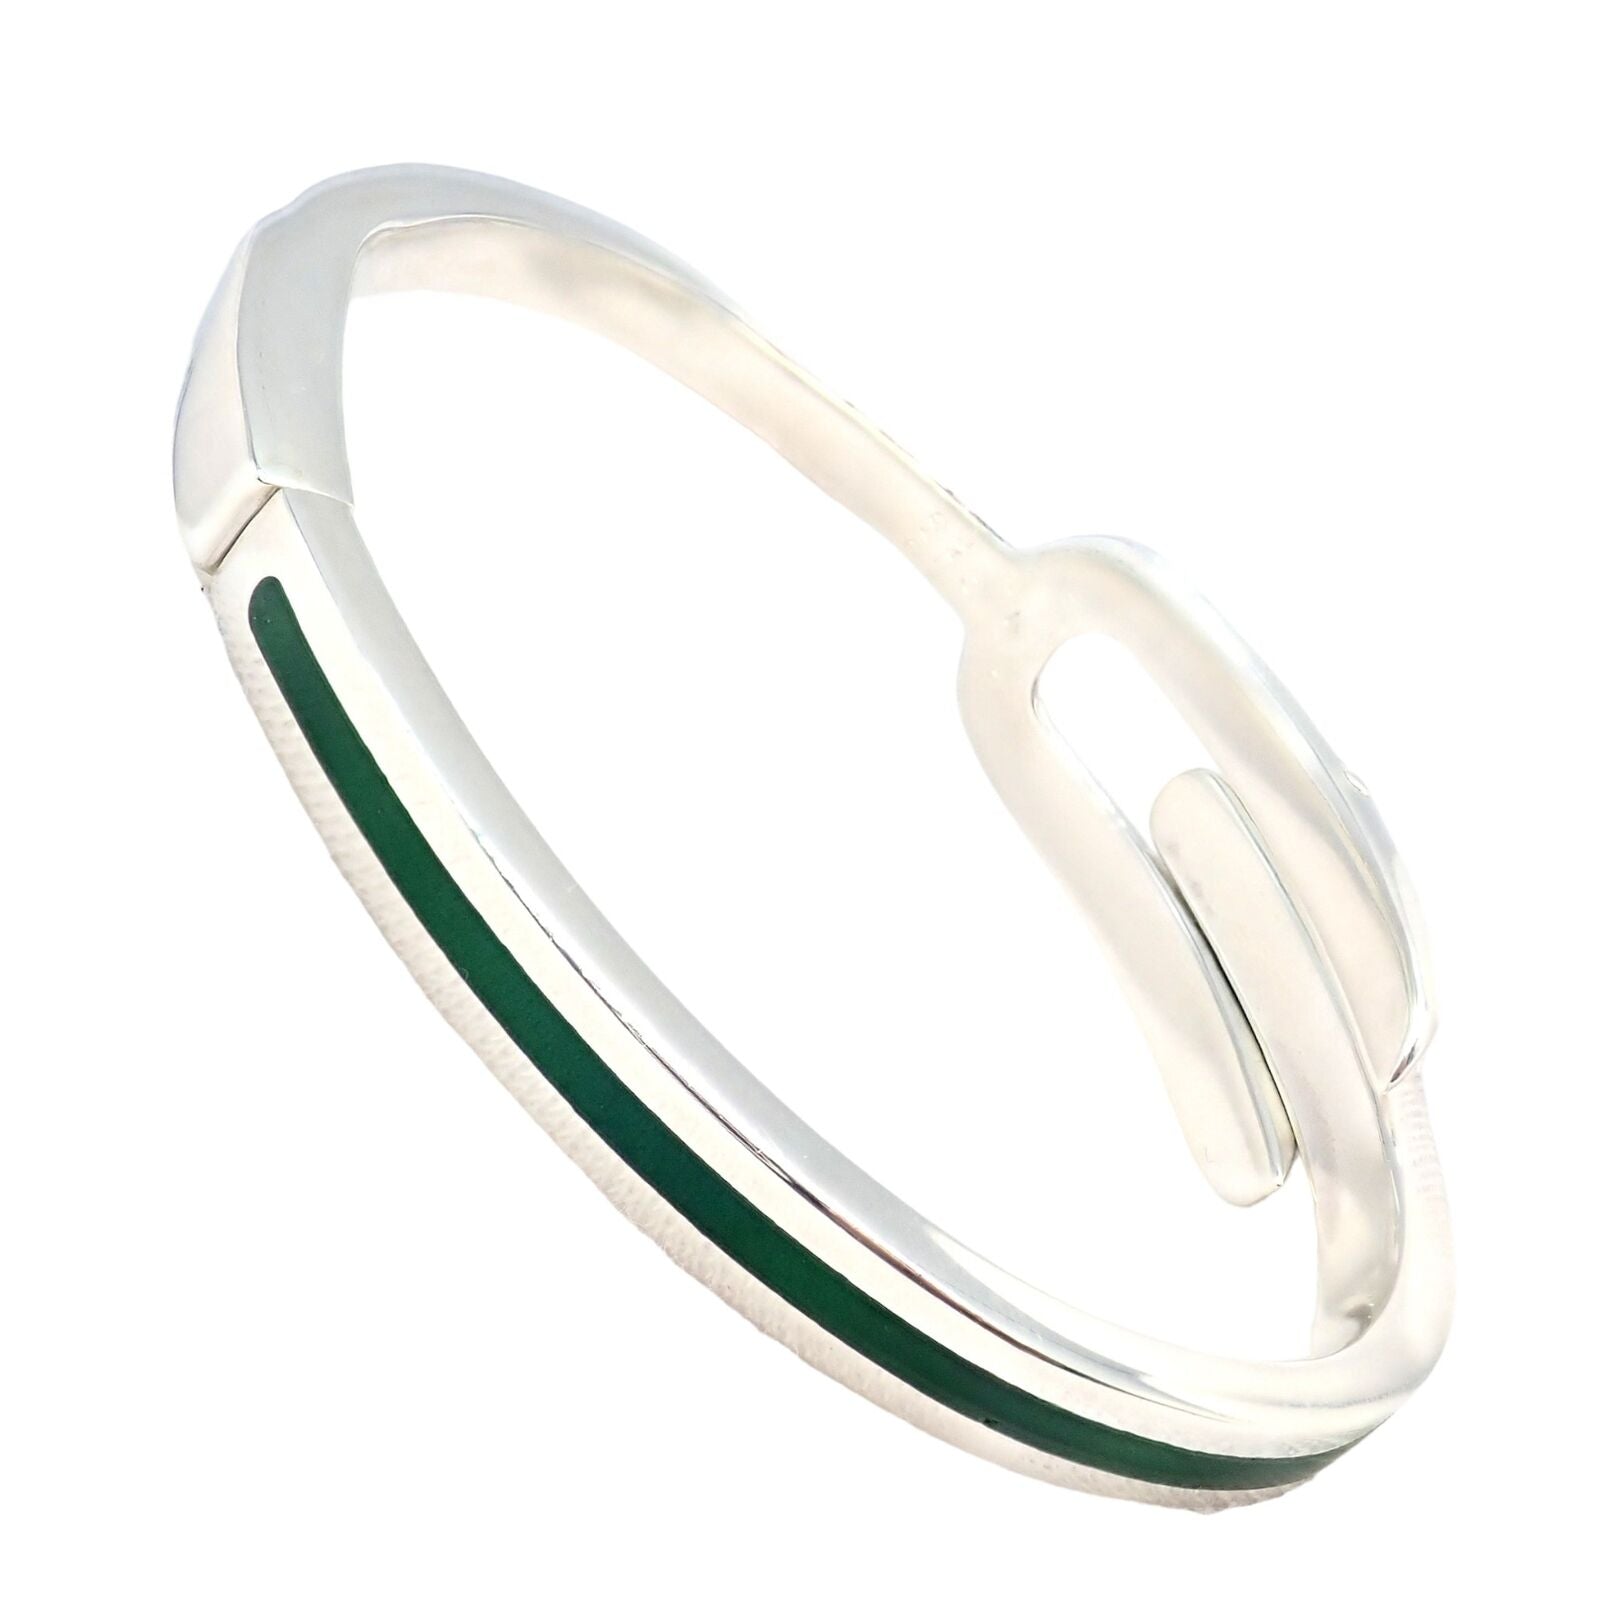 Gucci Jewelry & Watches:Fine Jewelry:Bracelets & Charms Vintage! Authentic Gucci Silver Green Enamel Bangle Bracelet